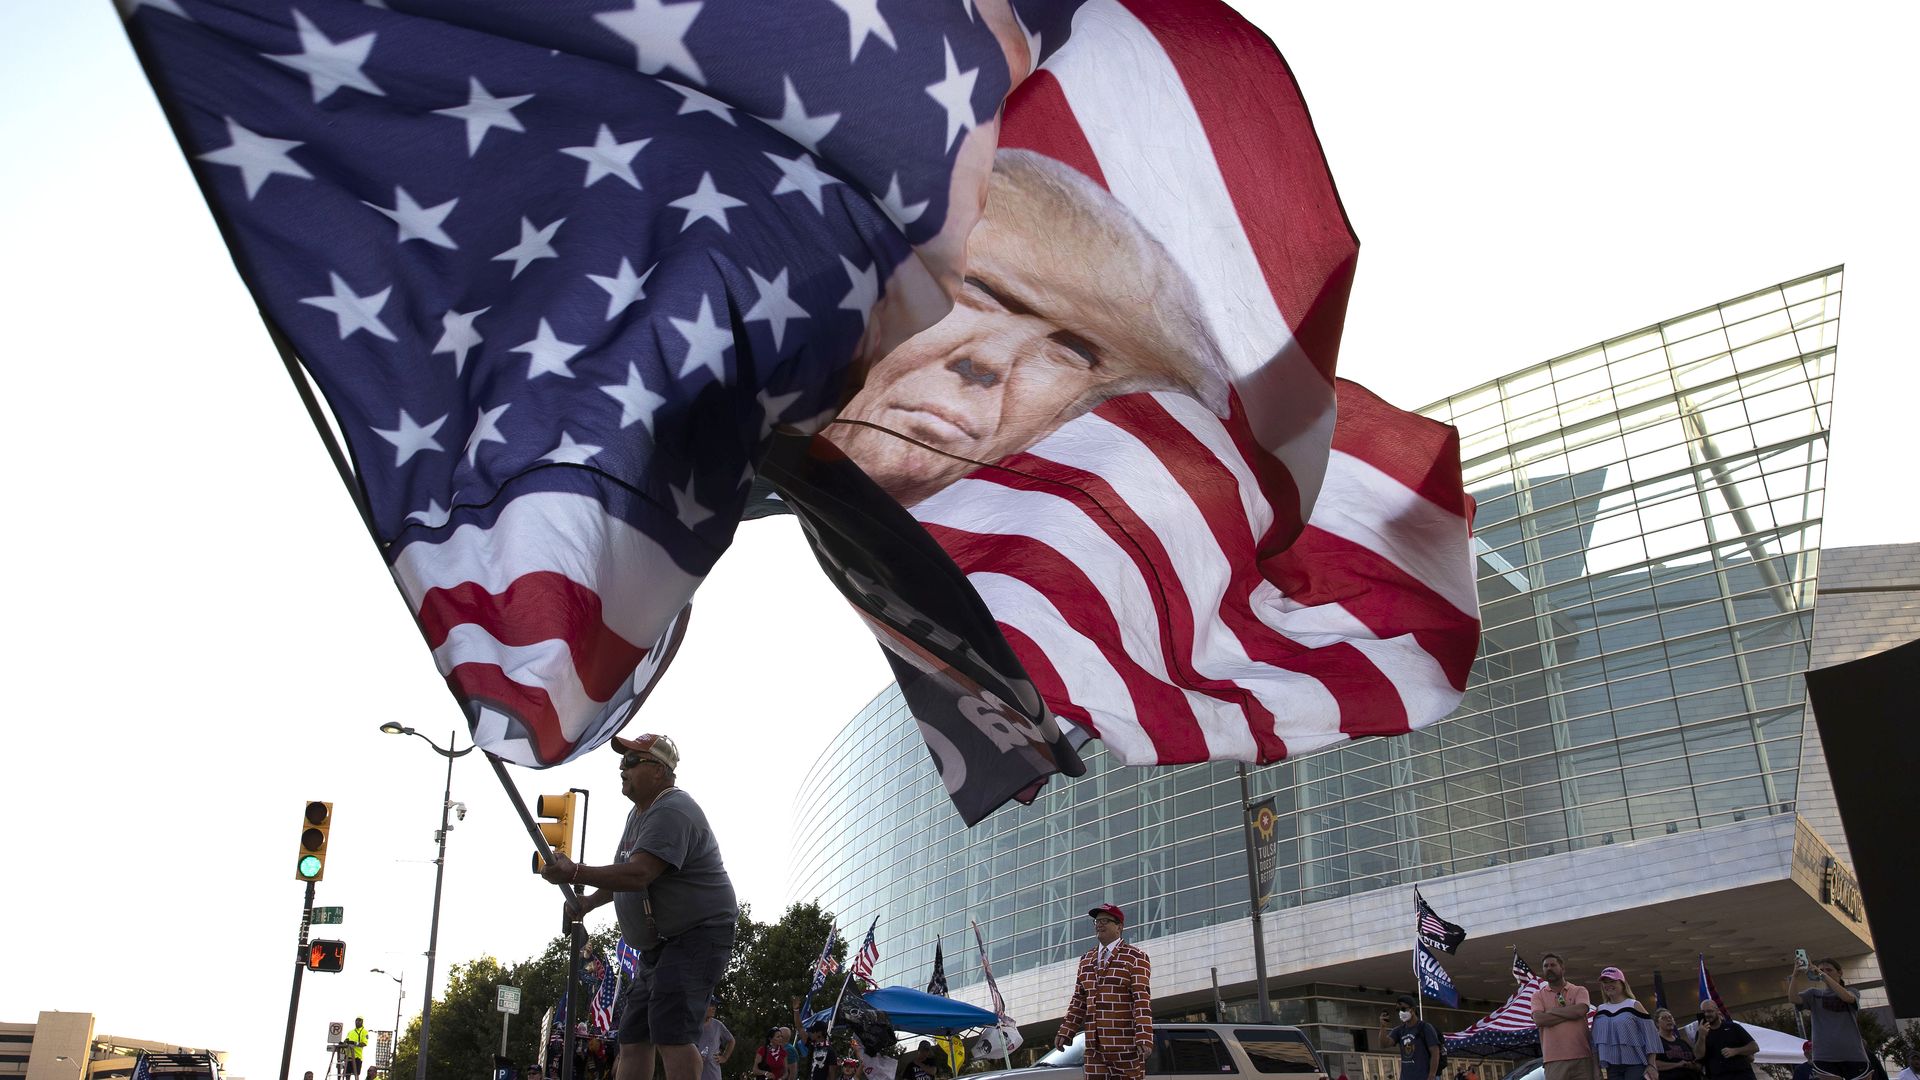 A man waves a huge American flag with President Trump's face on it outside the BOK Center in Tulsa, Oklahoma